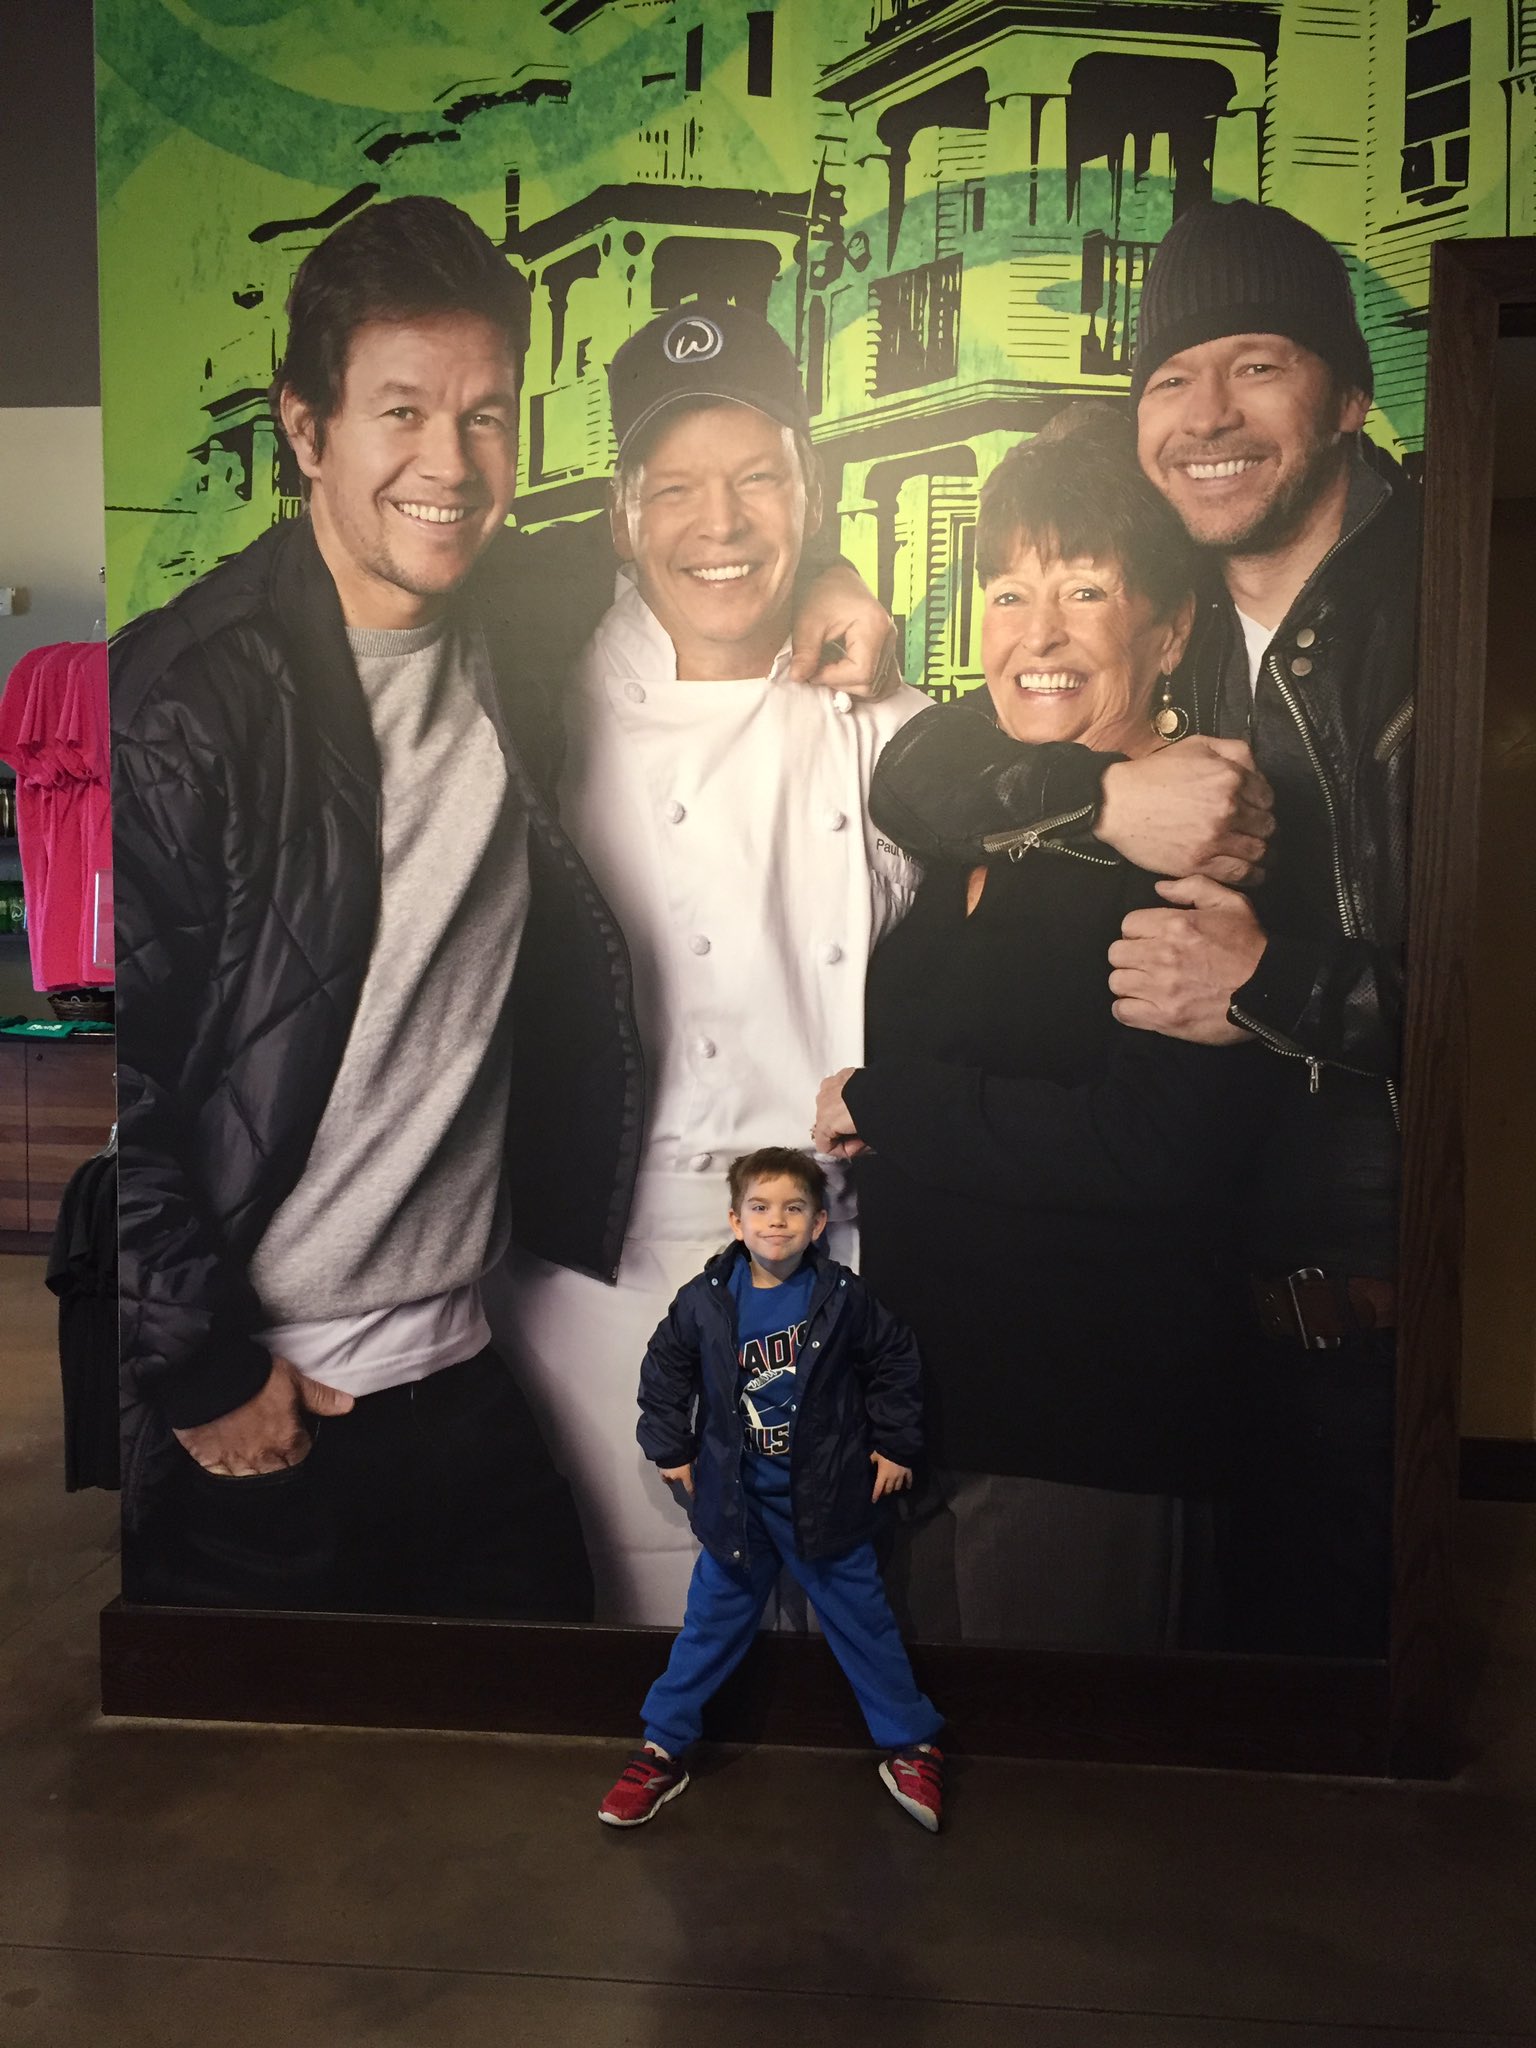 BentleysMom on Twitter: "Enjoyed our first trip to @wahlOWA the ...